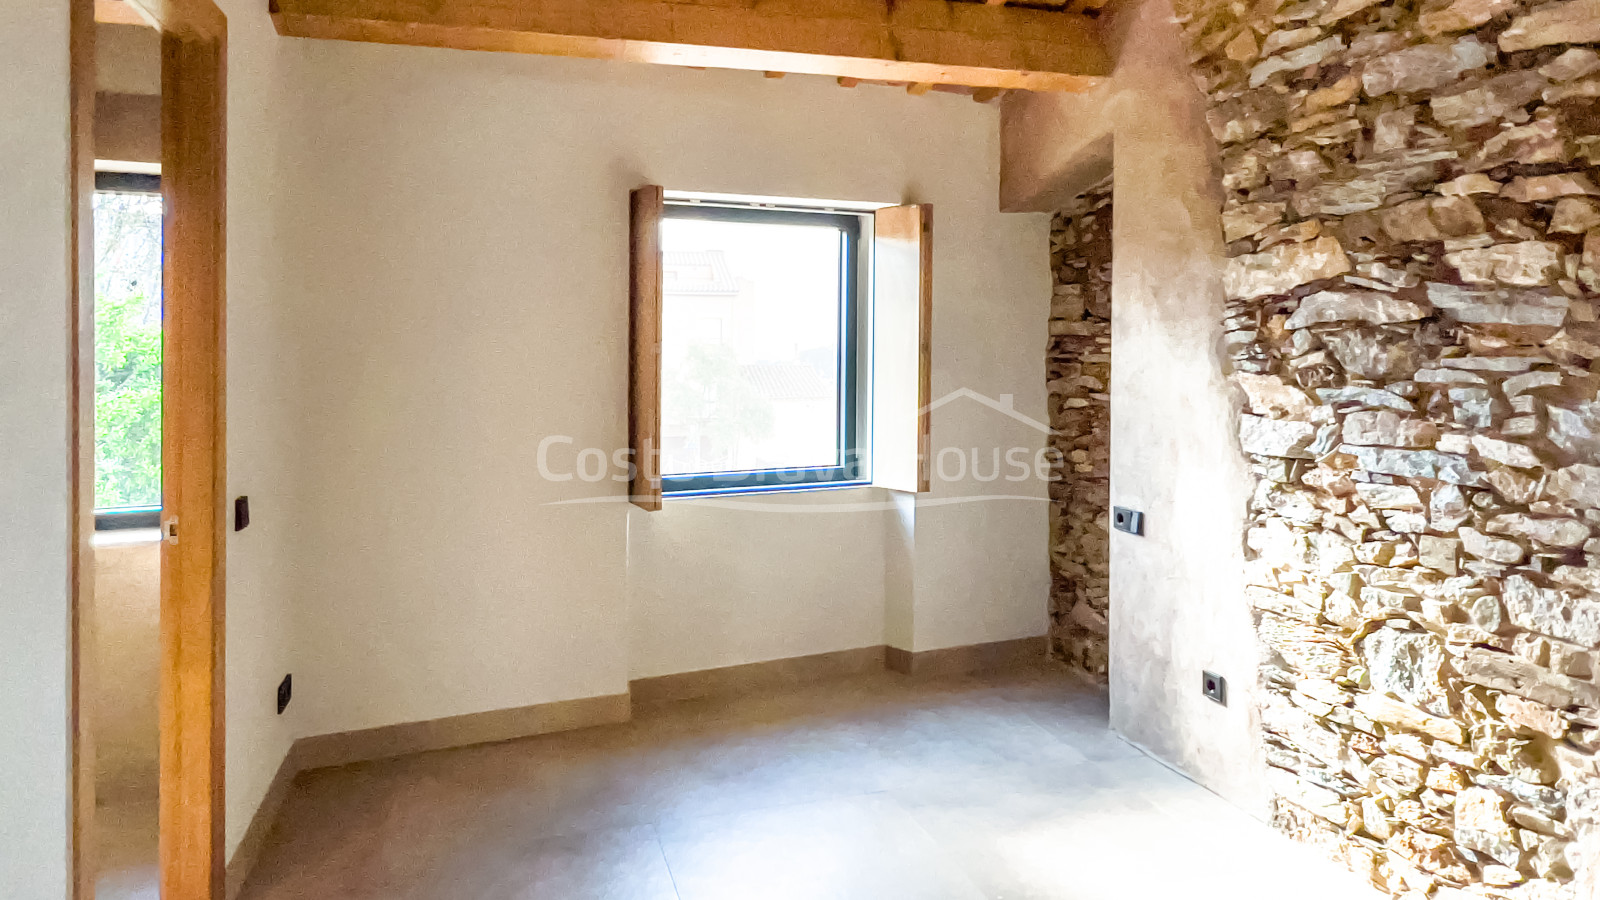 Delightful newly renovated townhouse for sale in Begur, 2 min walking distance to the town centre